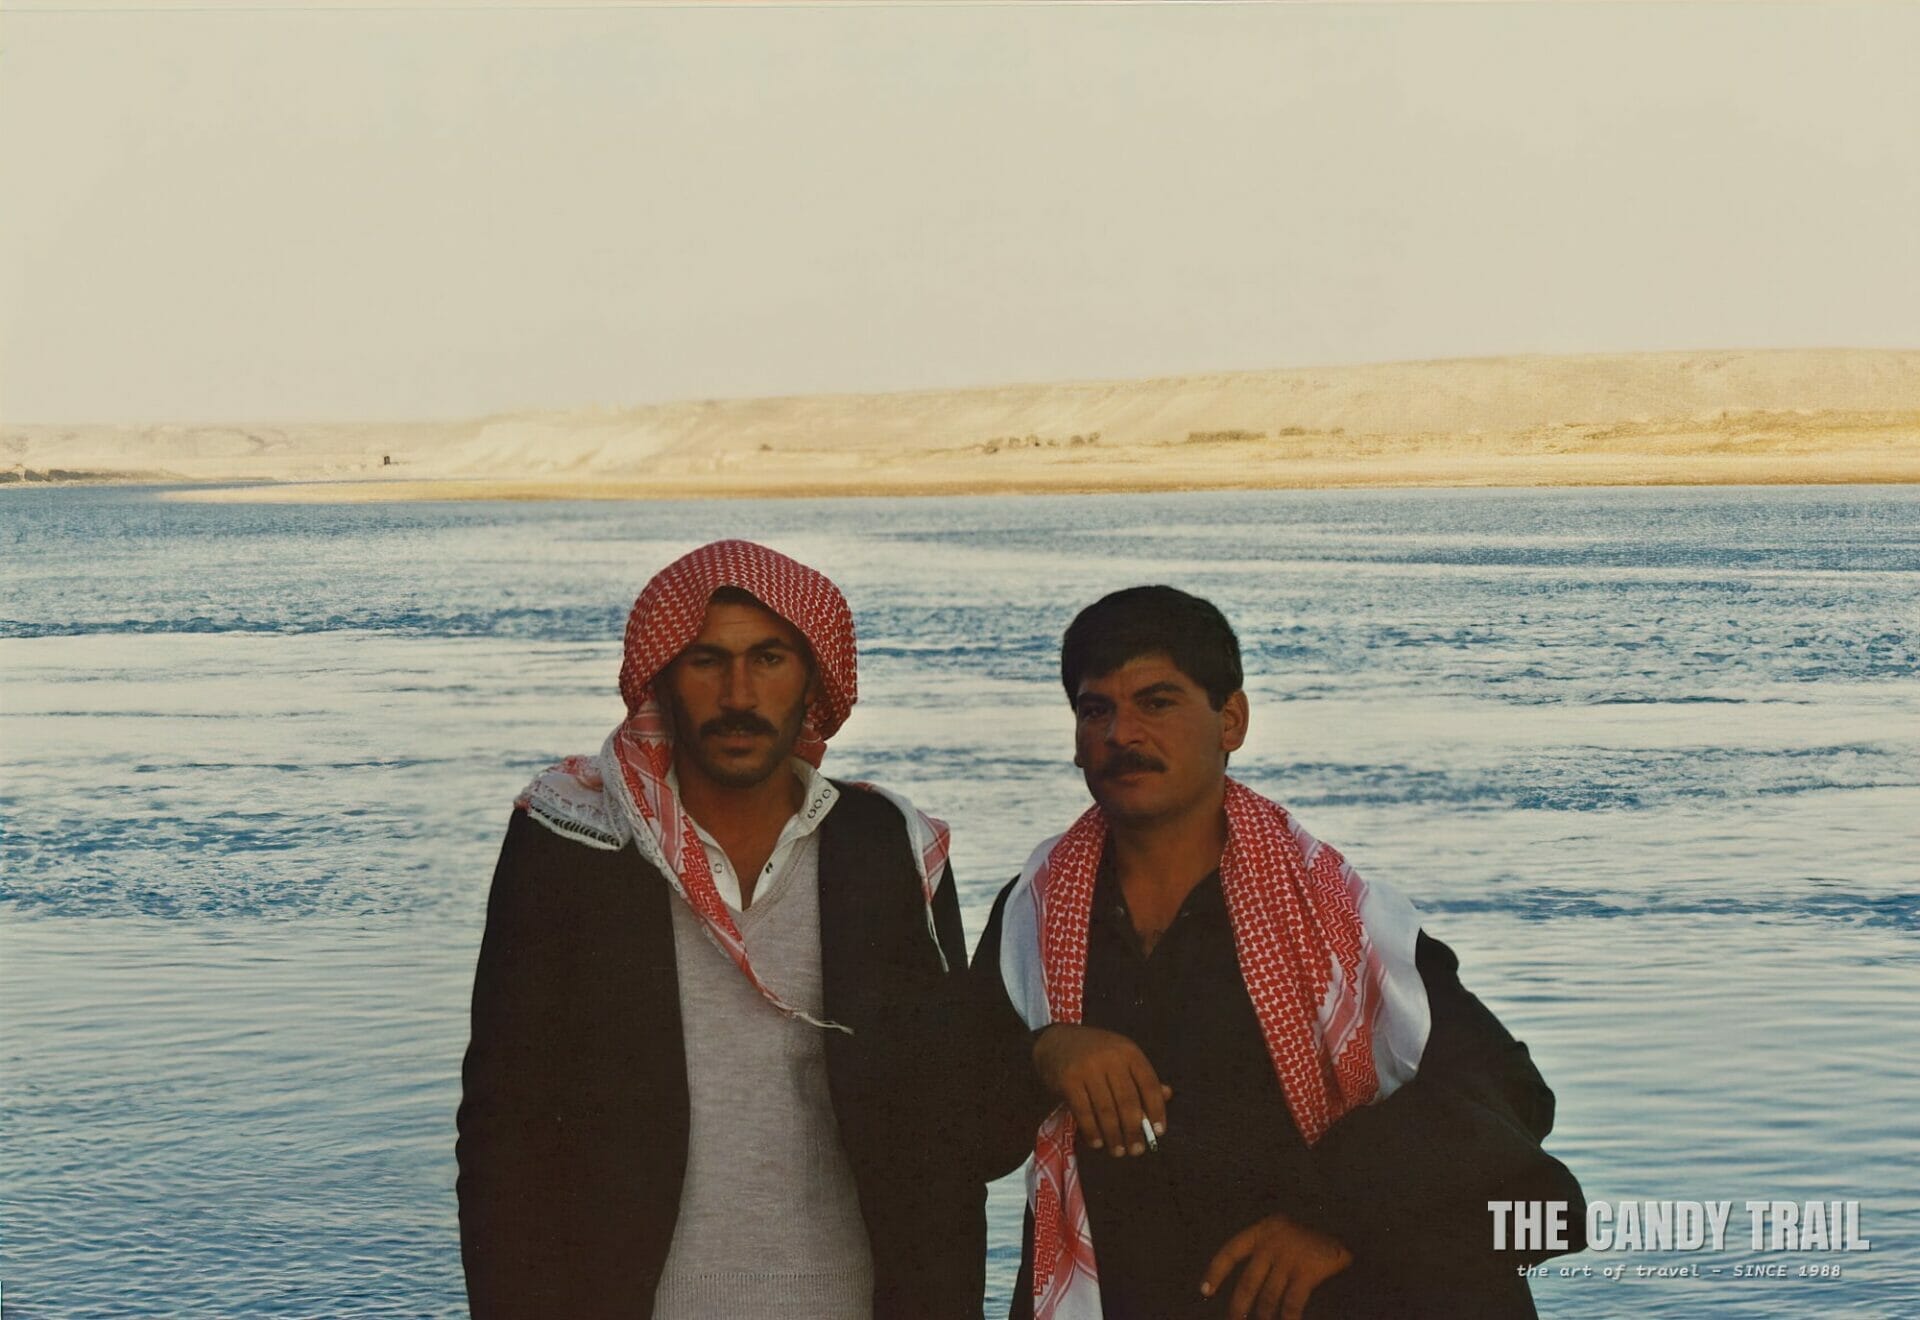 Syrian men along the route to Halibye following the Euphrates River traveling Syria in 1989.